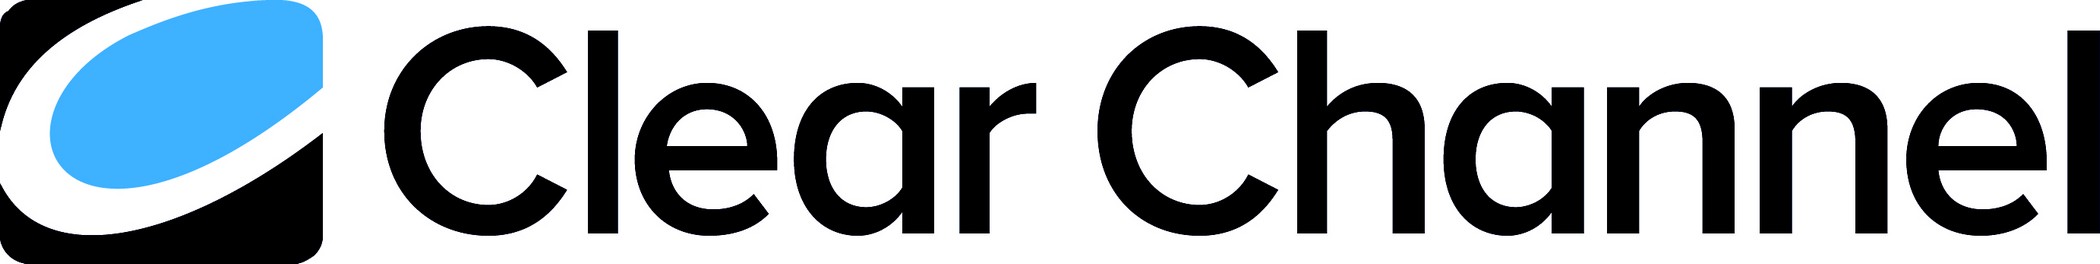 ClearChannel_Logo.png